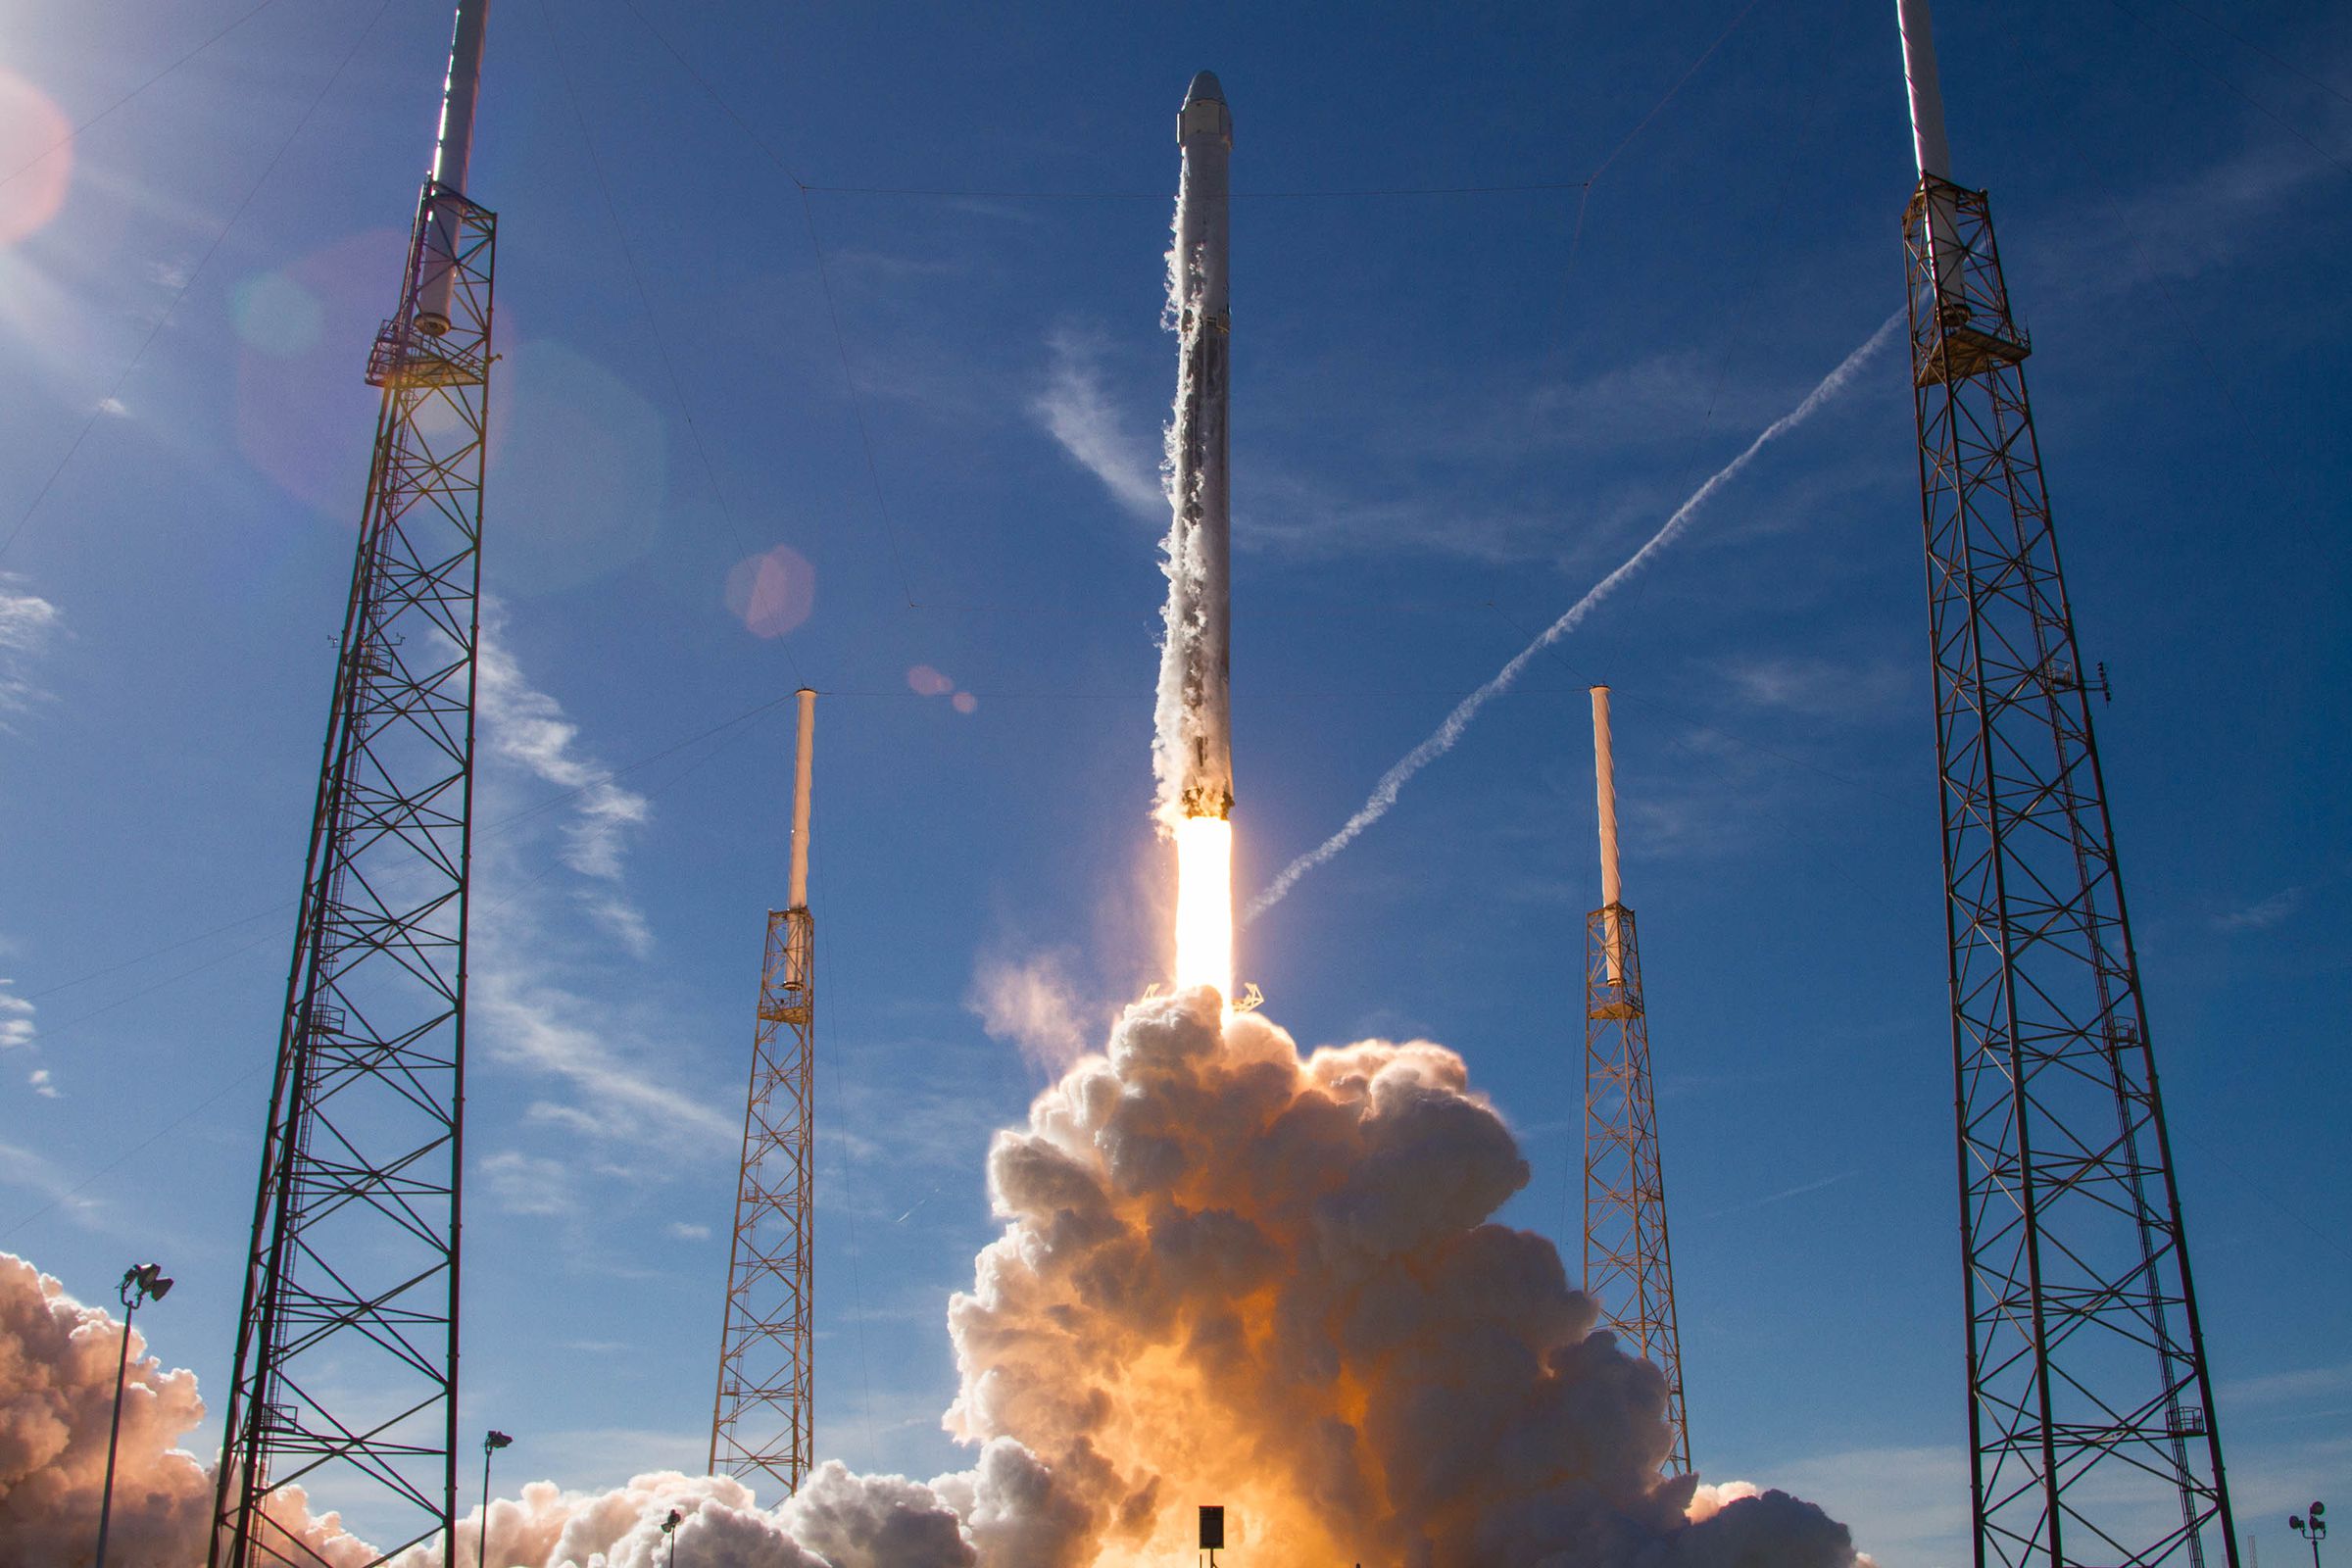 Commercial partners, such as SpaceX, are tasked with regularly launching cargo to the ISS